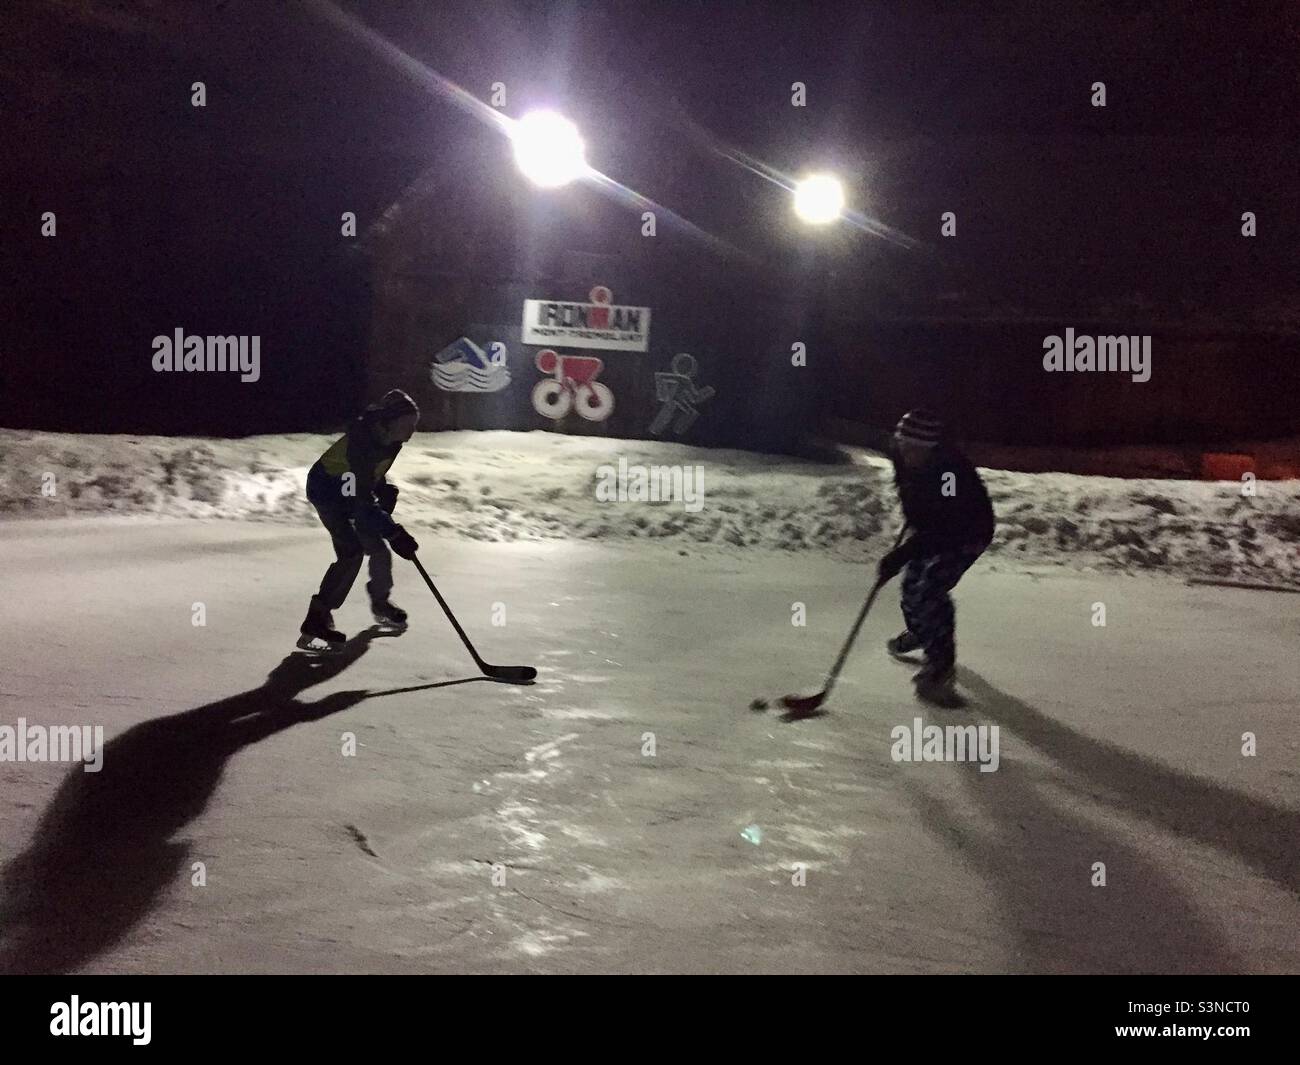 One on one late night hockey game. Stock Photo